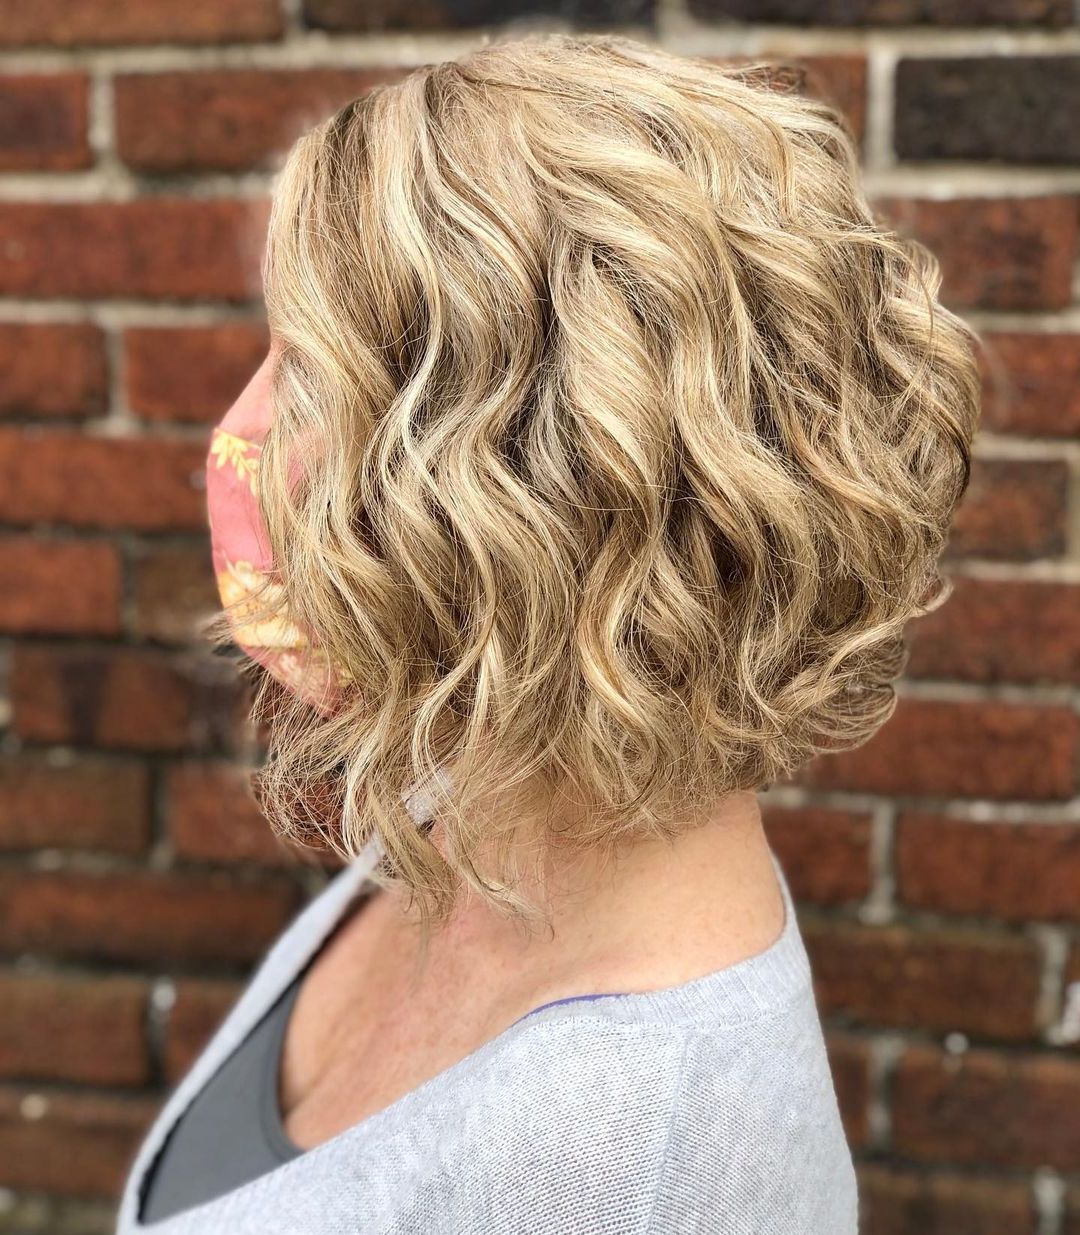 60+ Gorgeous Short Curly Hairstyles To Perfectly Shape Your Curls With Short Hairstyles With Loose Curls (View 8 of 25)